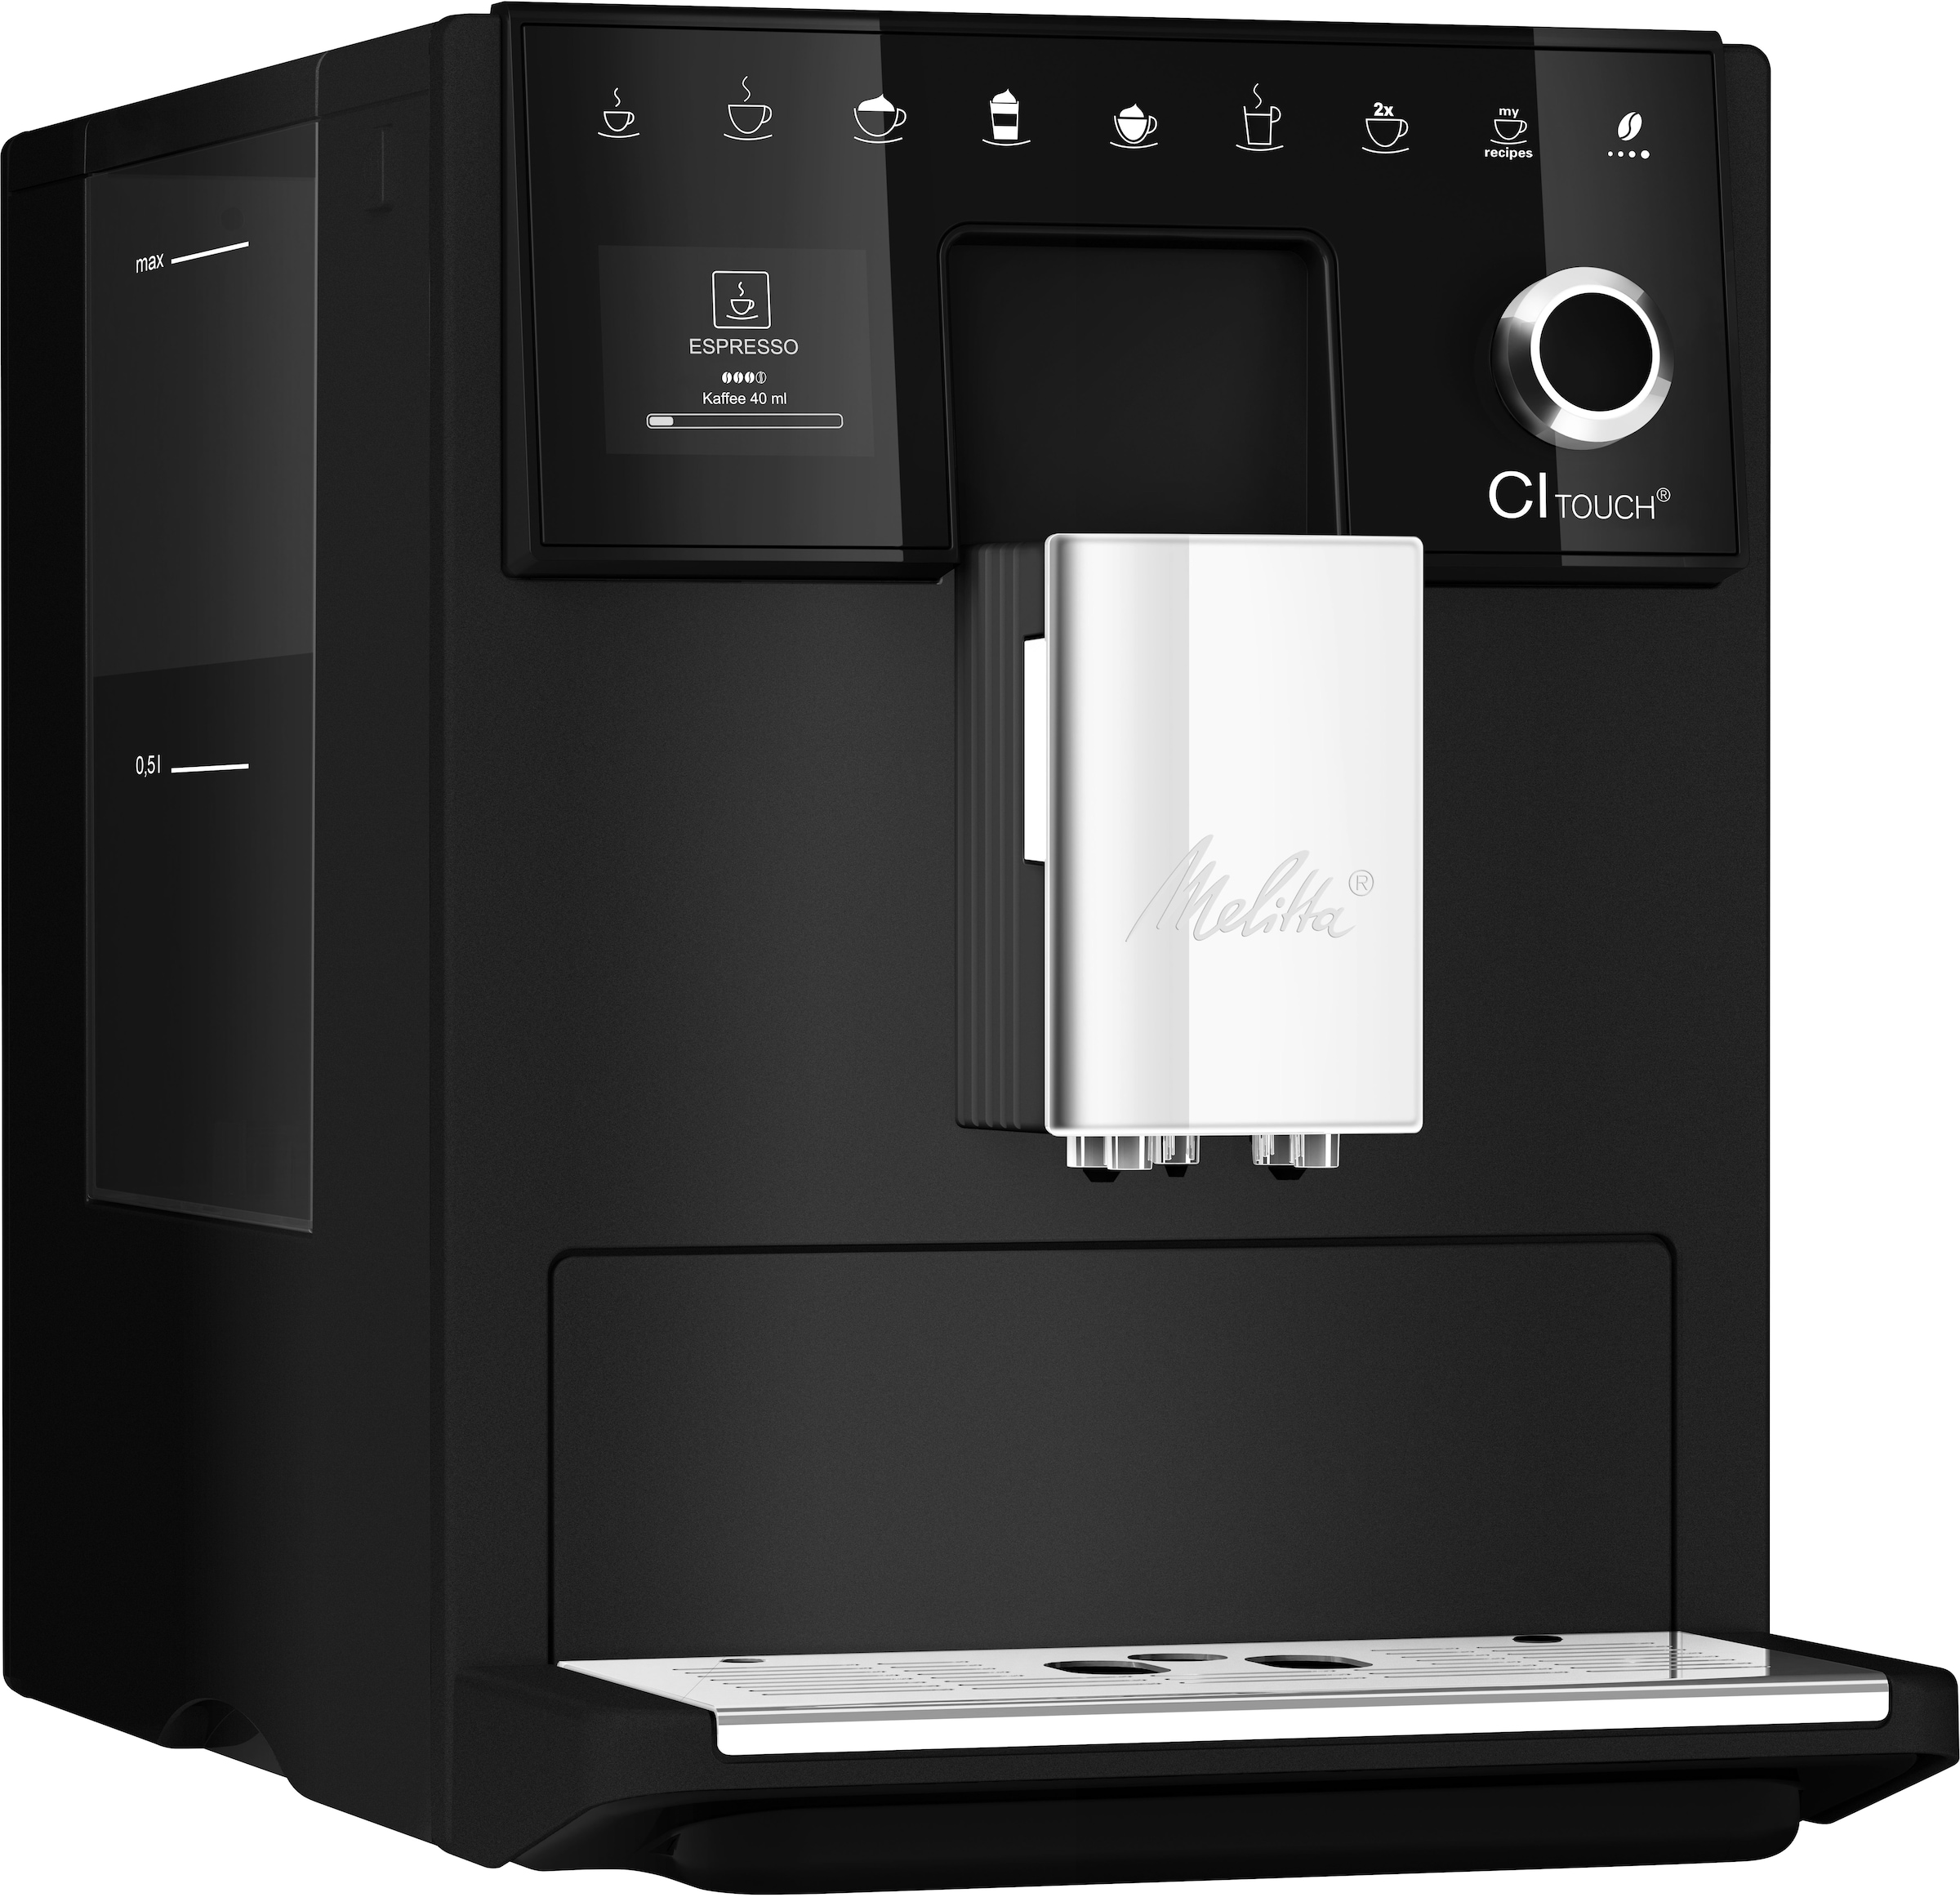 Melitta Kaffeevollautomat »CI Touch® F630-112«, frosted black, 2-Kammern-Bohnenbehälter, One Touch Bedienung